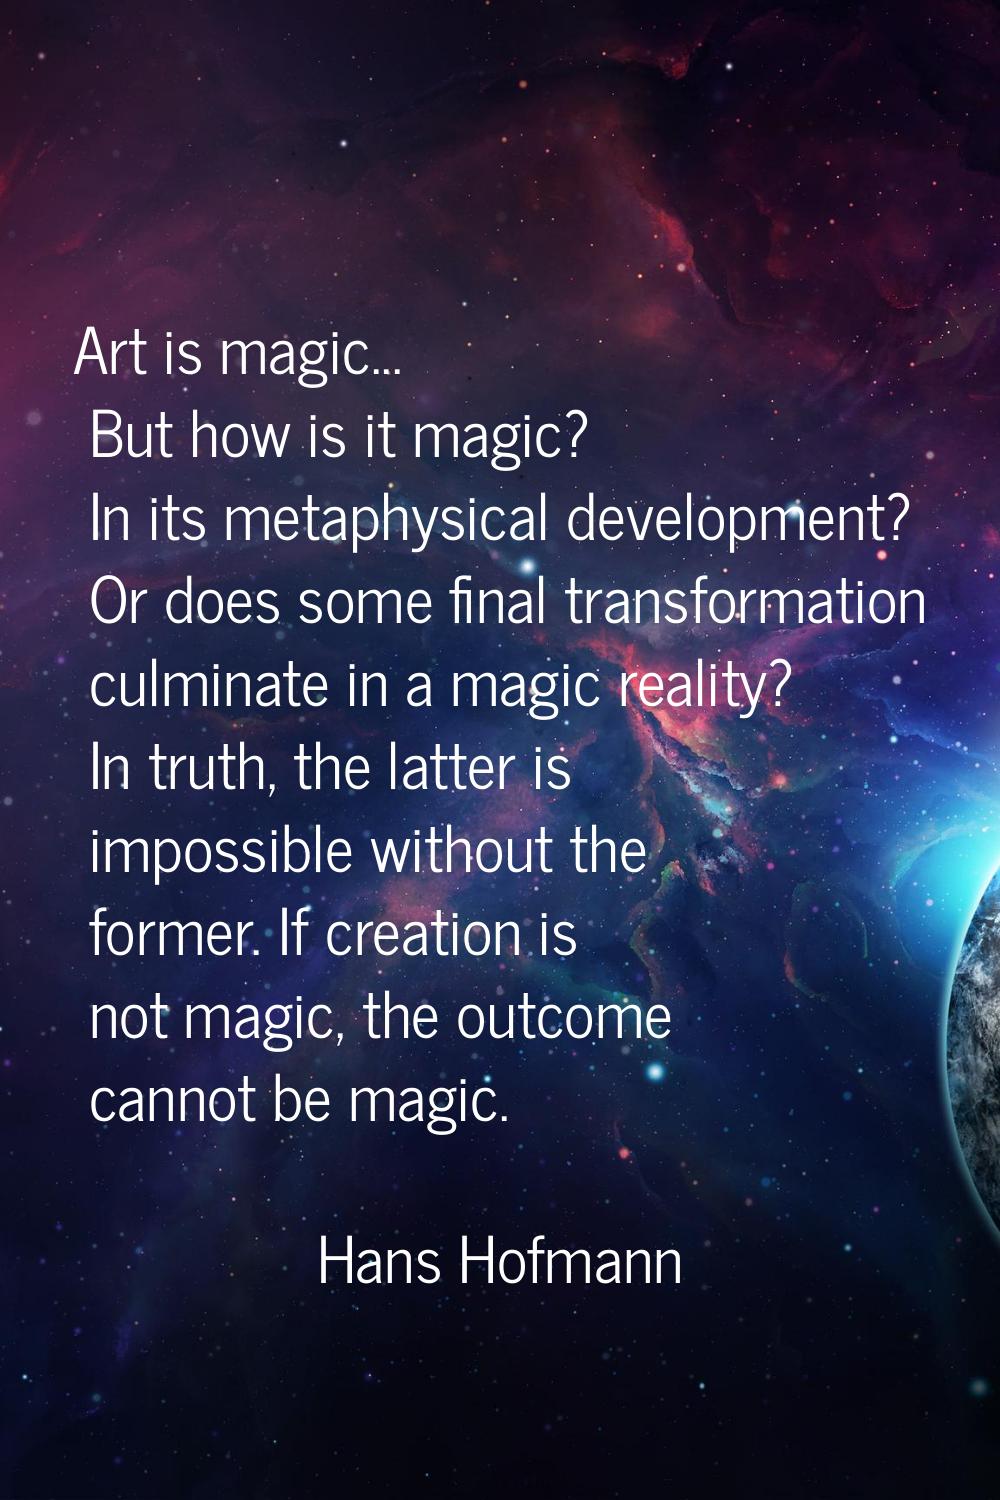 Art is magic... But how is it magic? In its metaphysical development? Or does some final transforma